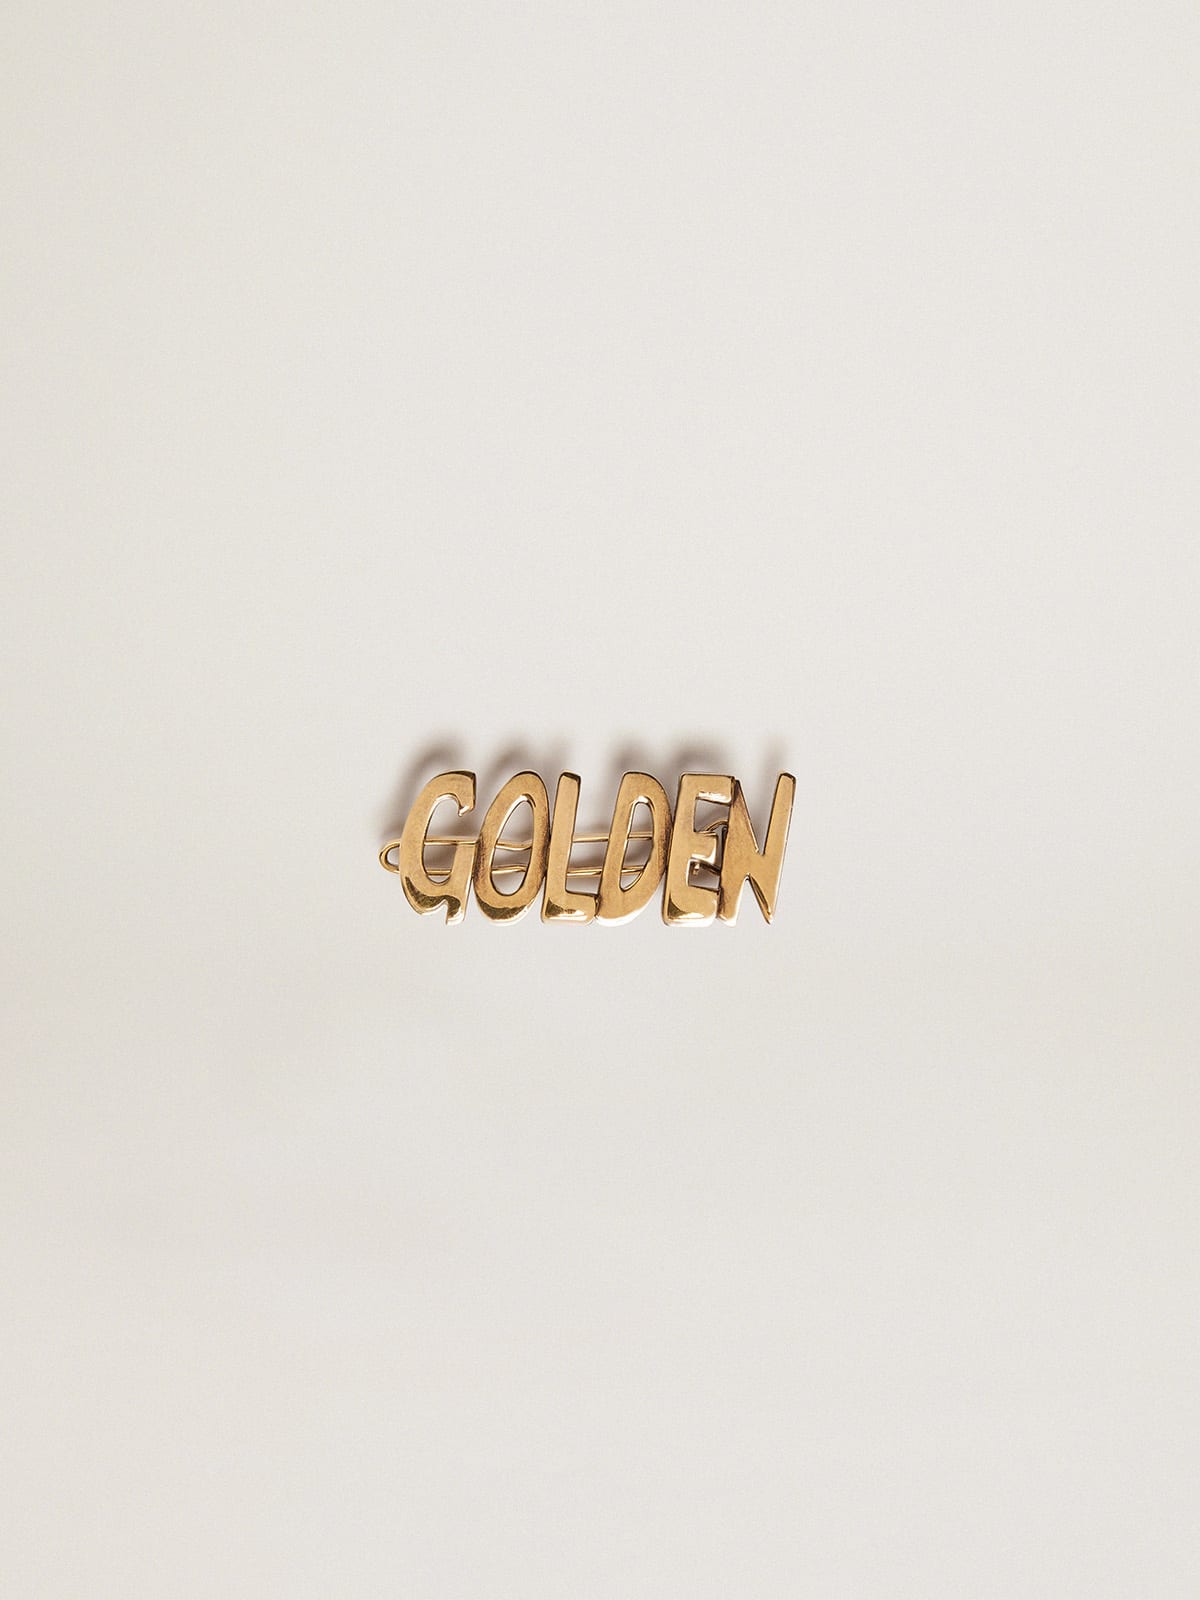 Golden Goose - Men's lace lock with clip in old gold color with Golden lettering in 